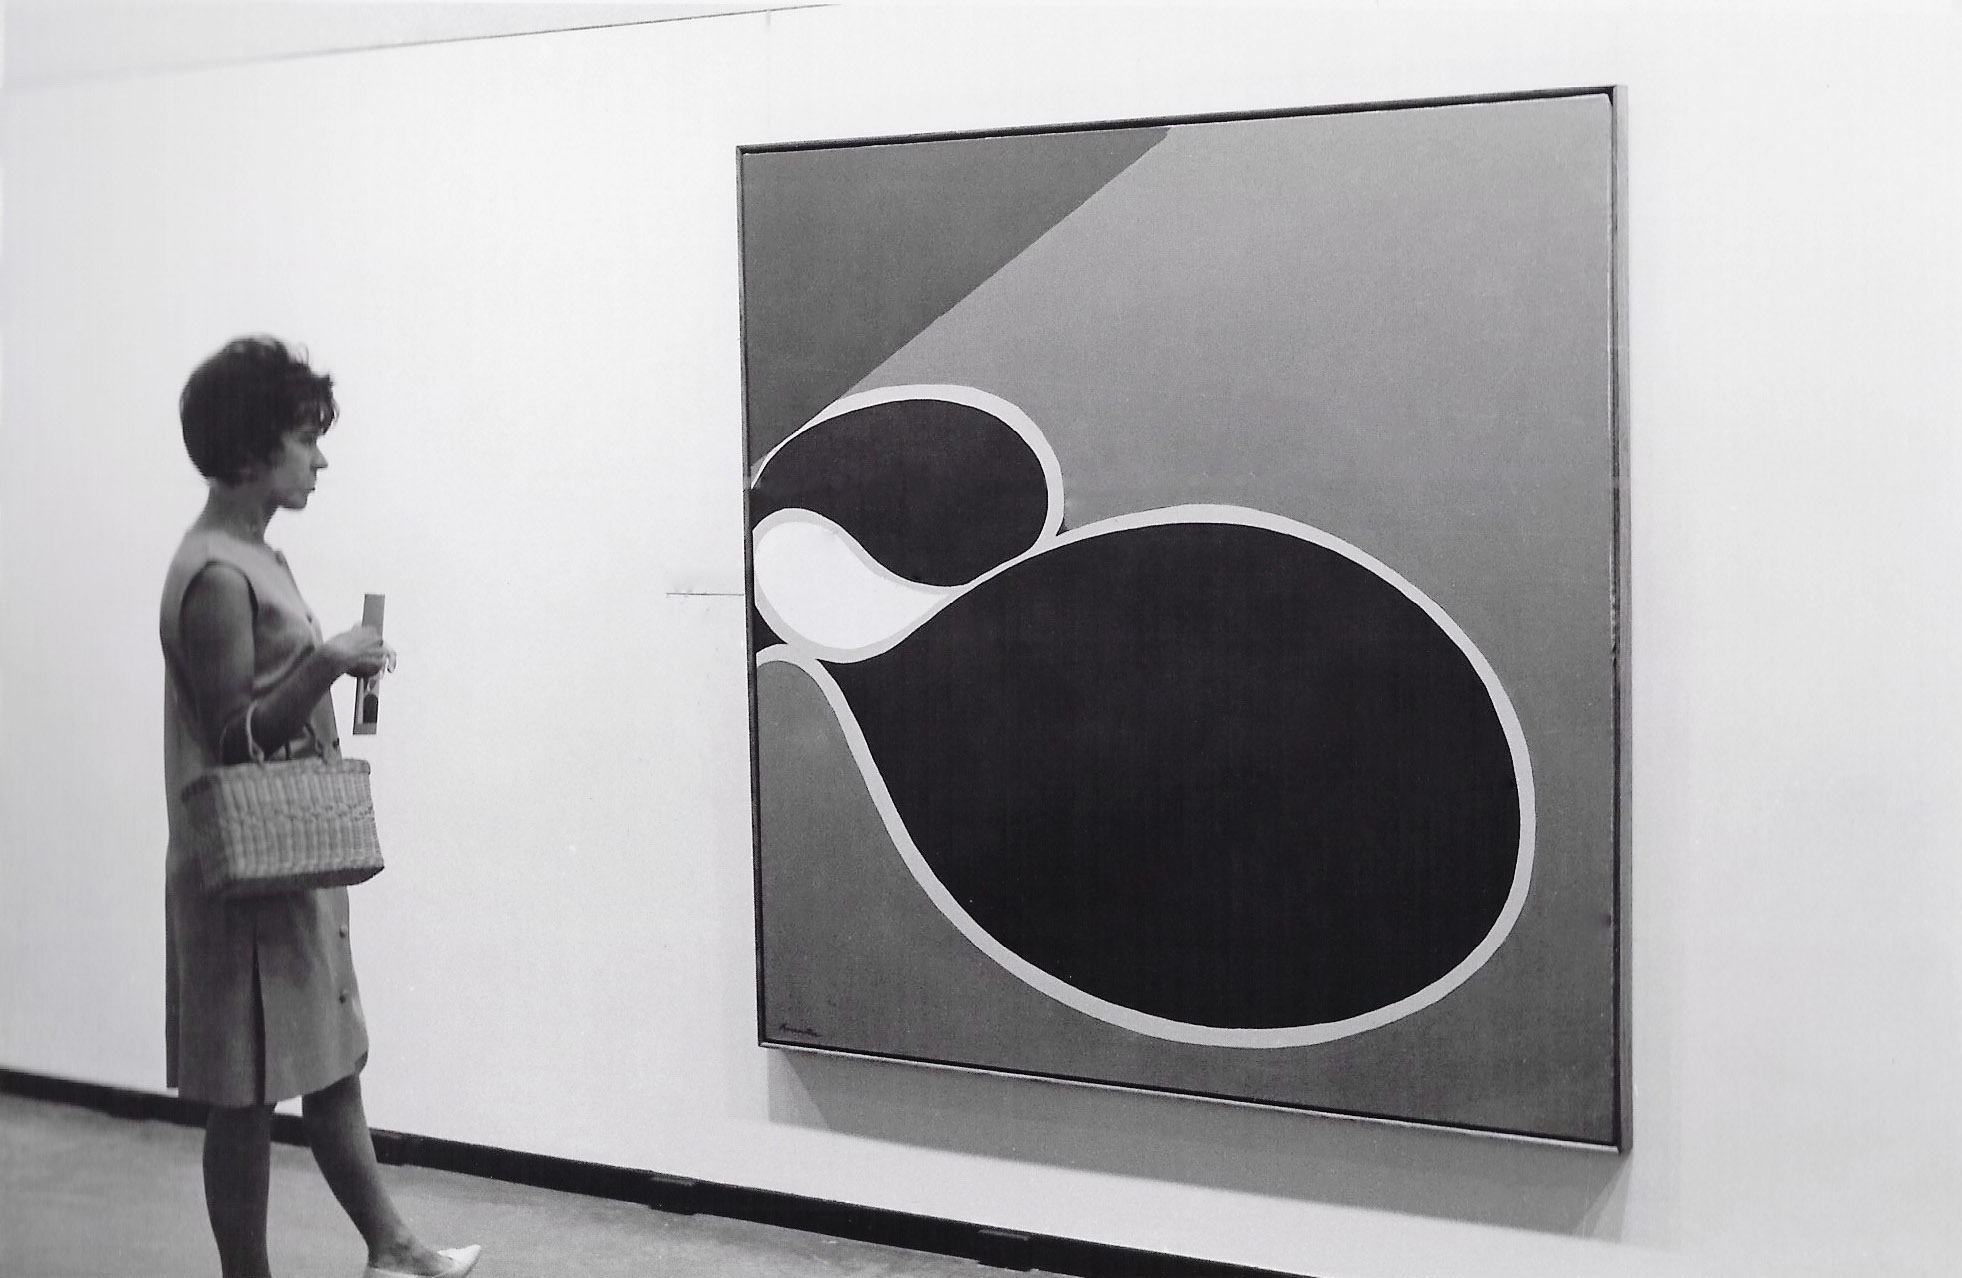  Exhibition of works by Kanemitsu at the Honolulu Academy of Arts, 1967. 